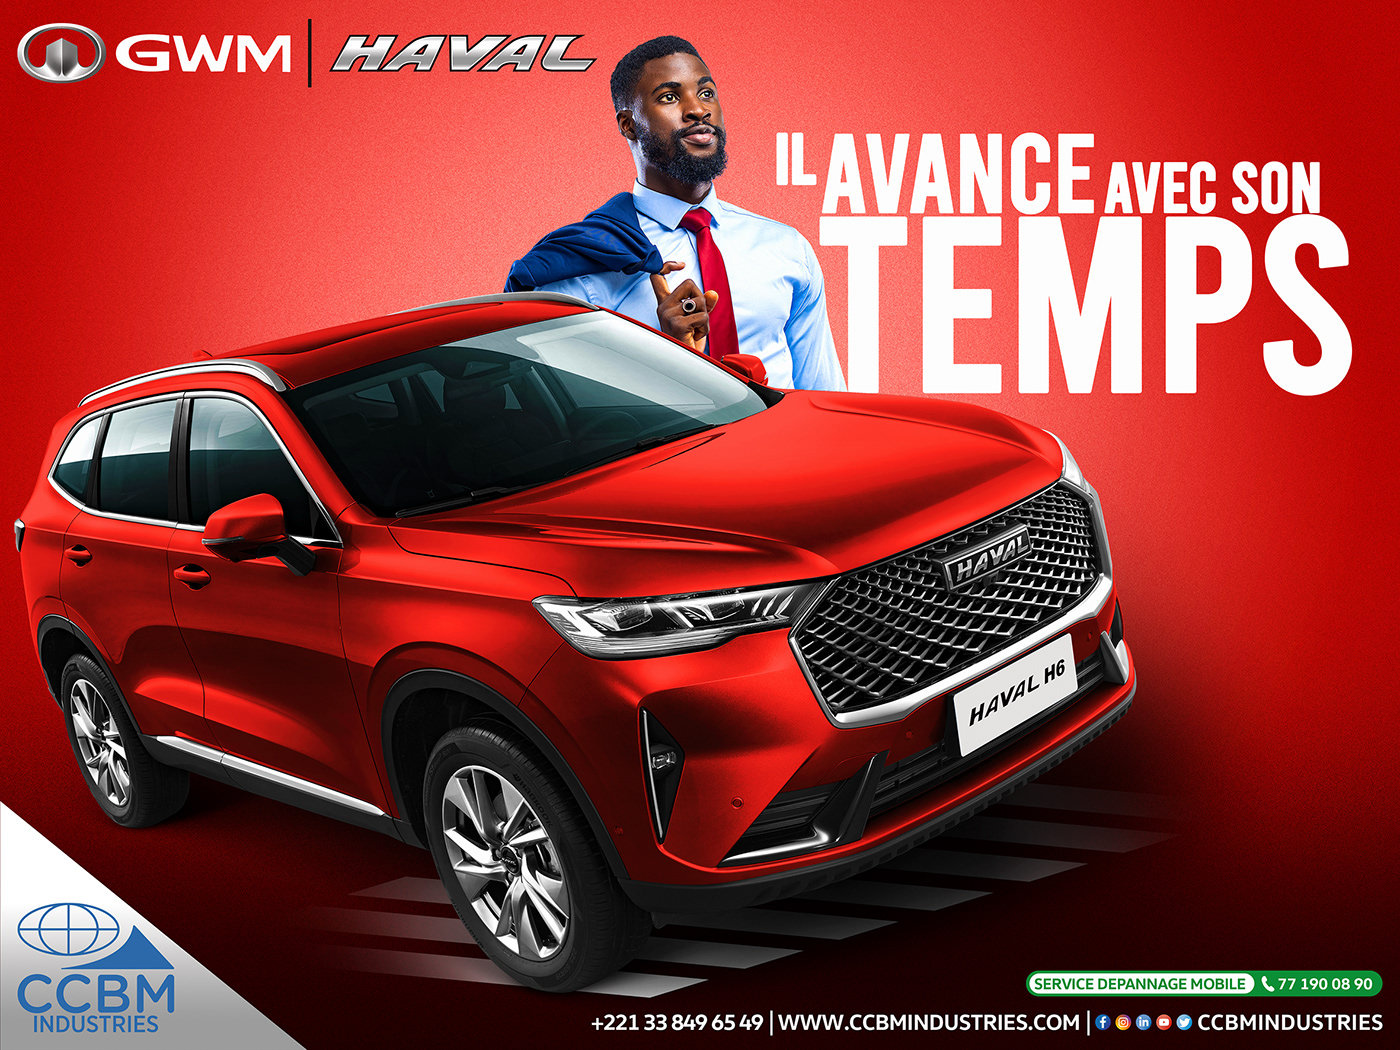 ads Advertising  Auto campaign car GWM haval marketing   poster Vehicle